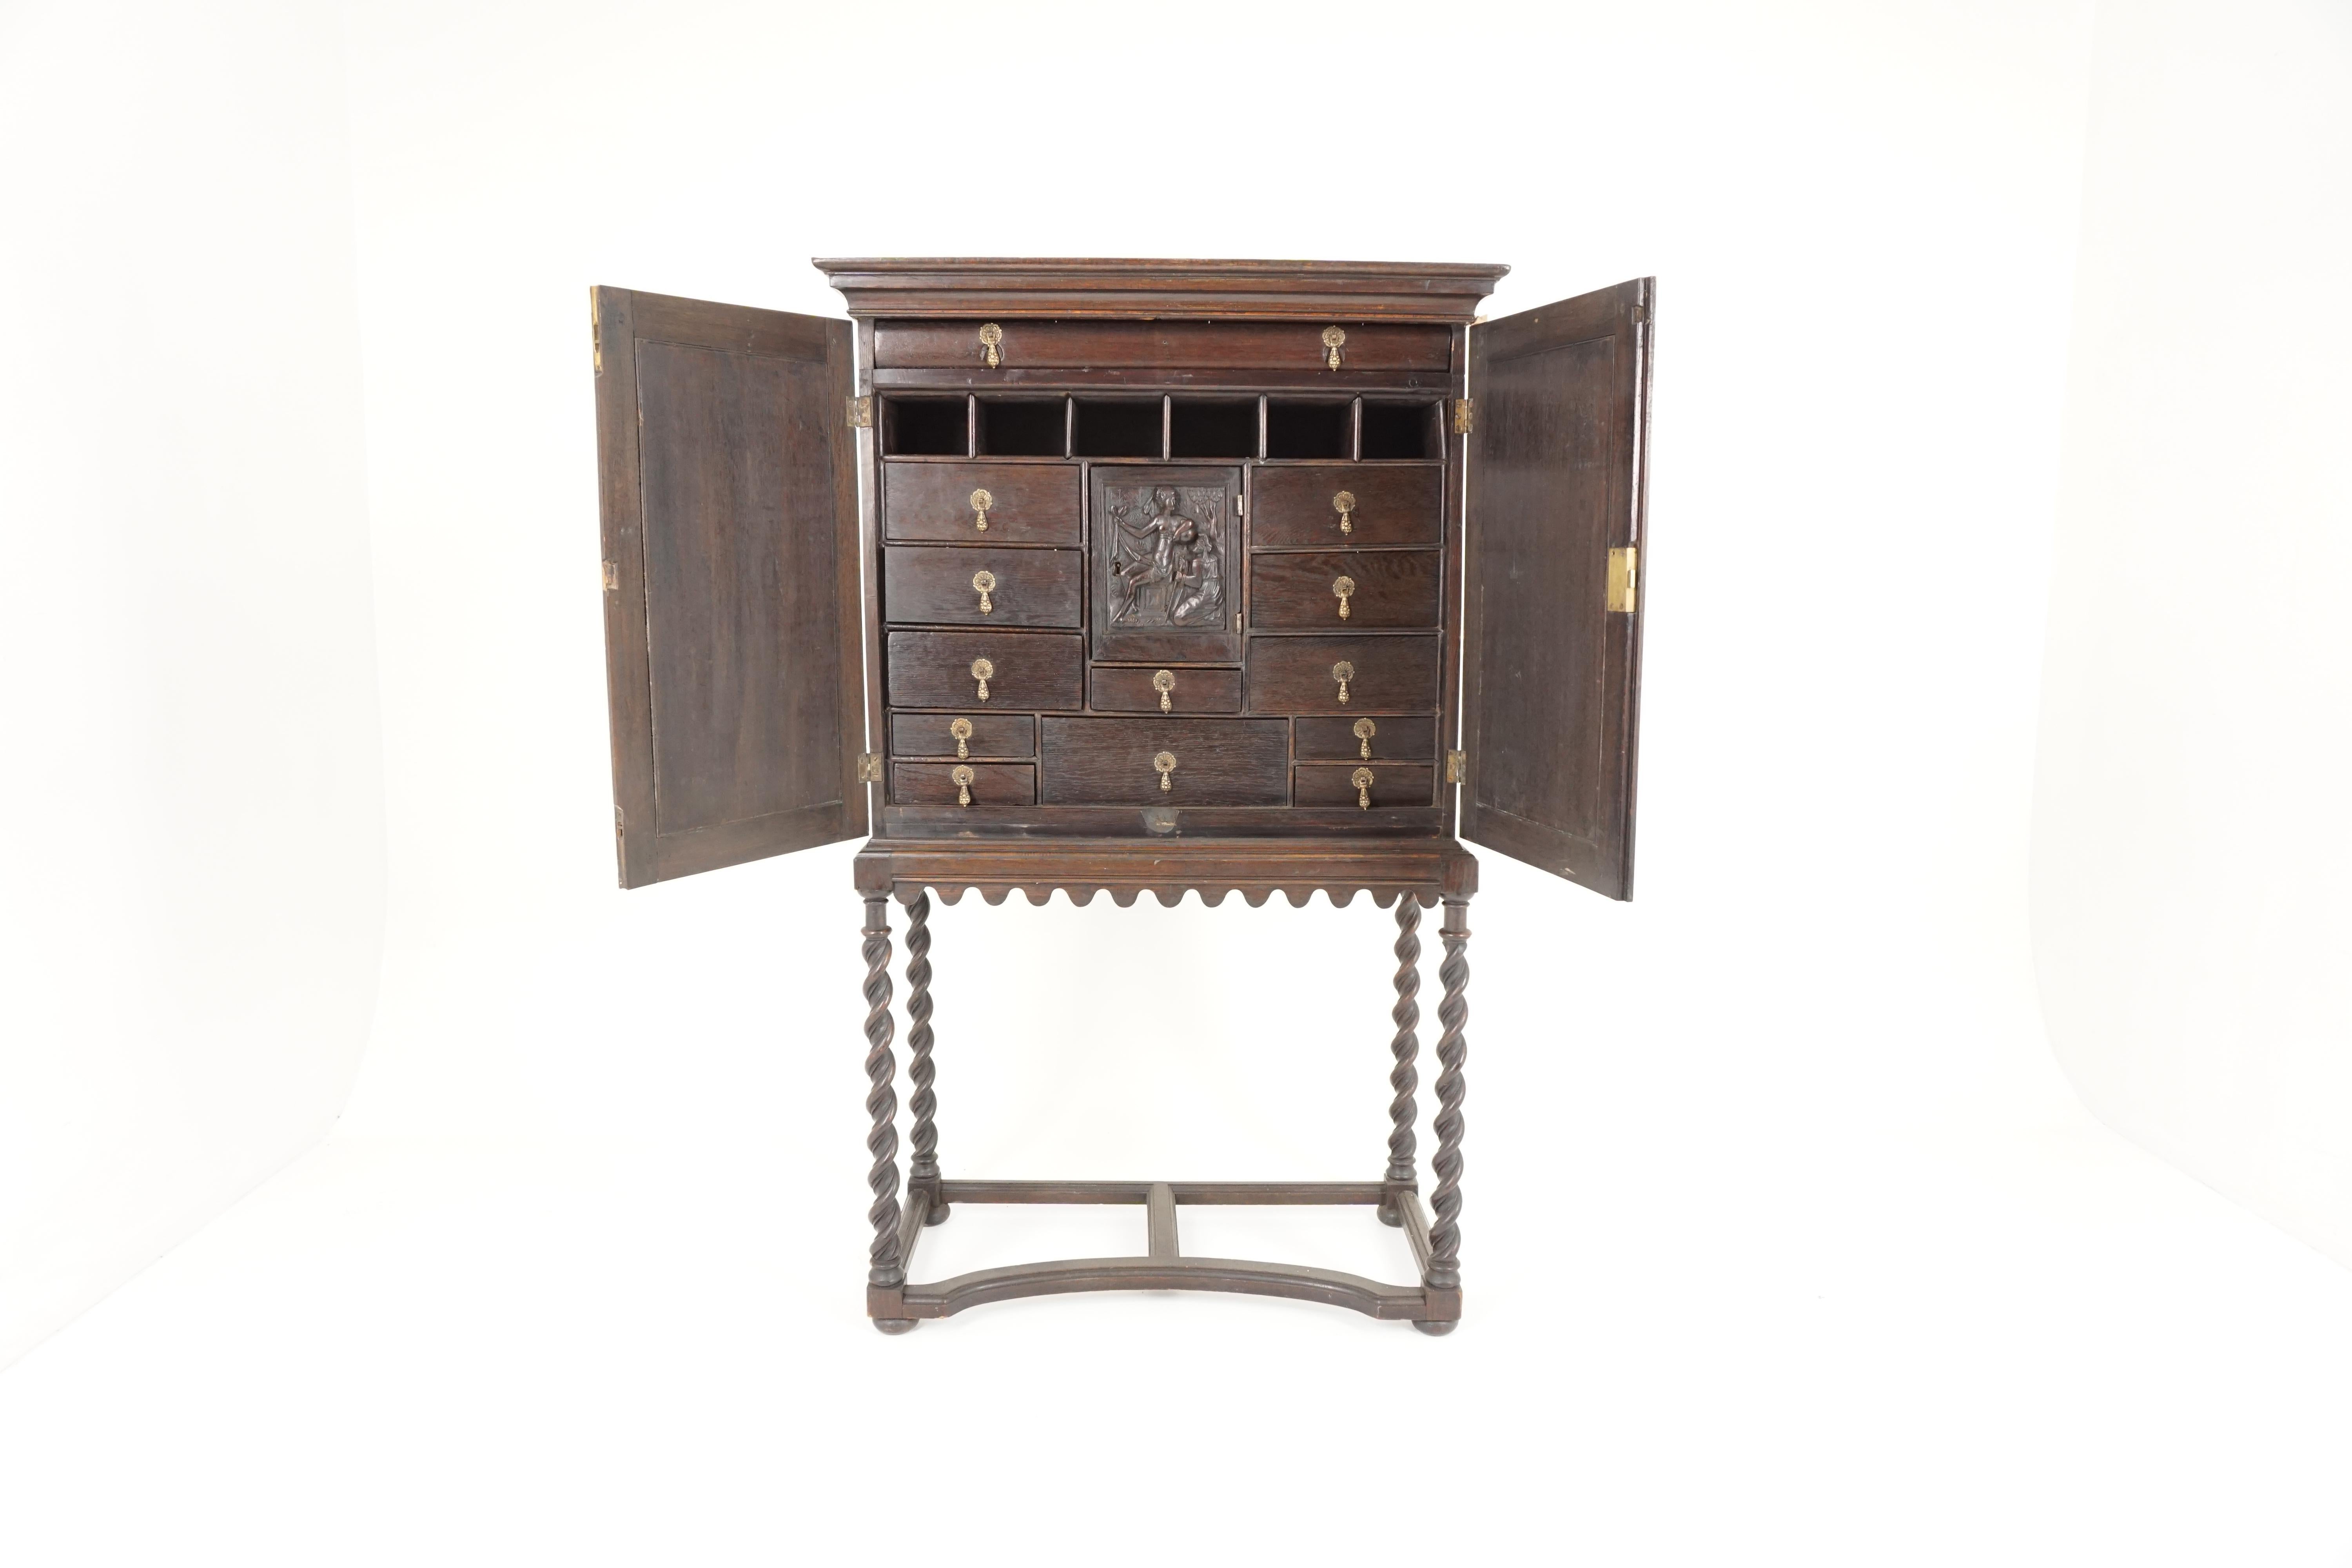 Antique Gothic Cabinet, Early 19th Century Carved Oak Collectors Cabinet on Stand, Antique Furniture, Scotland 1810, B1803

Scotland 1910
Solid Oak
Original Finish
Rectangular with Moulded Edge
Over a pair of Gothic Style Doors
Enclosing 13